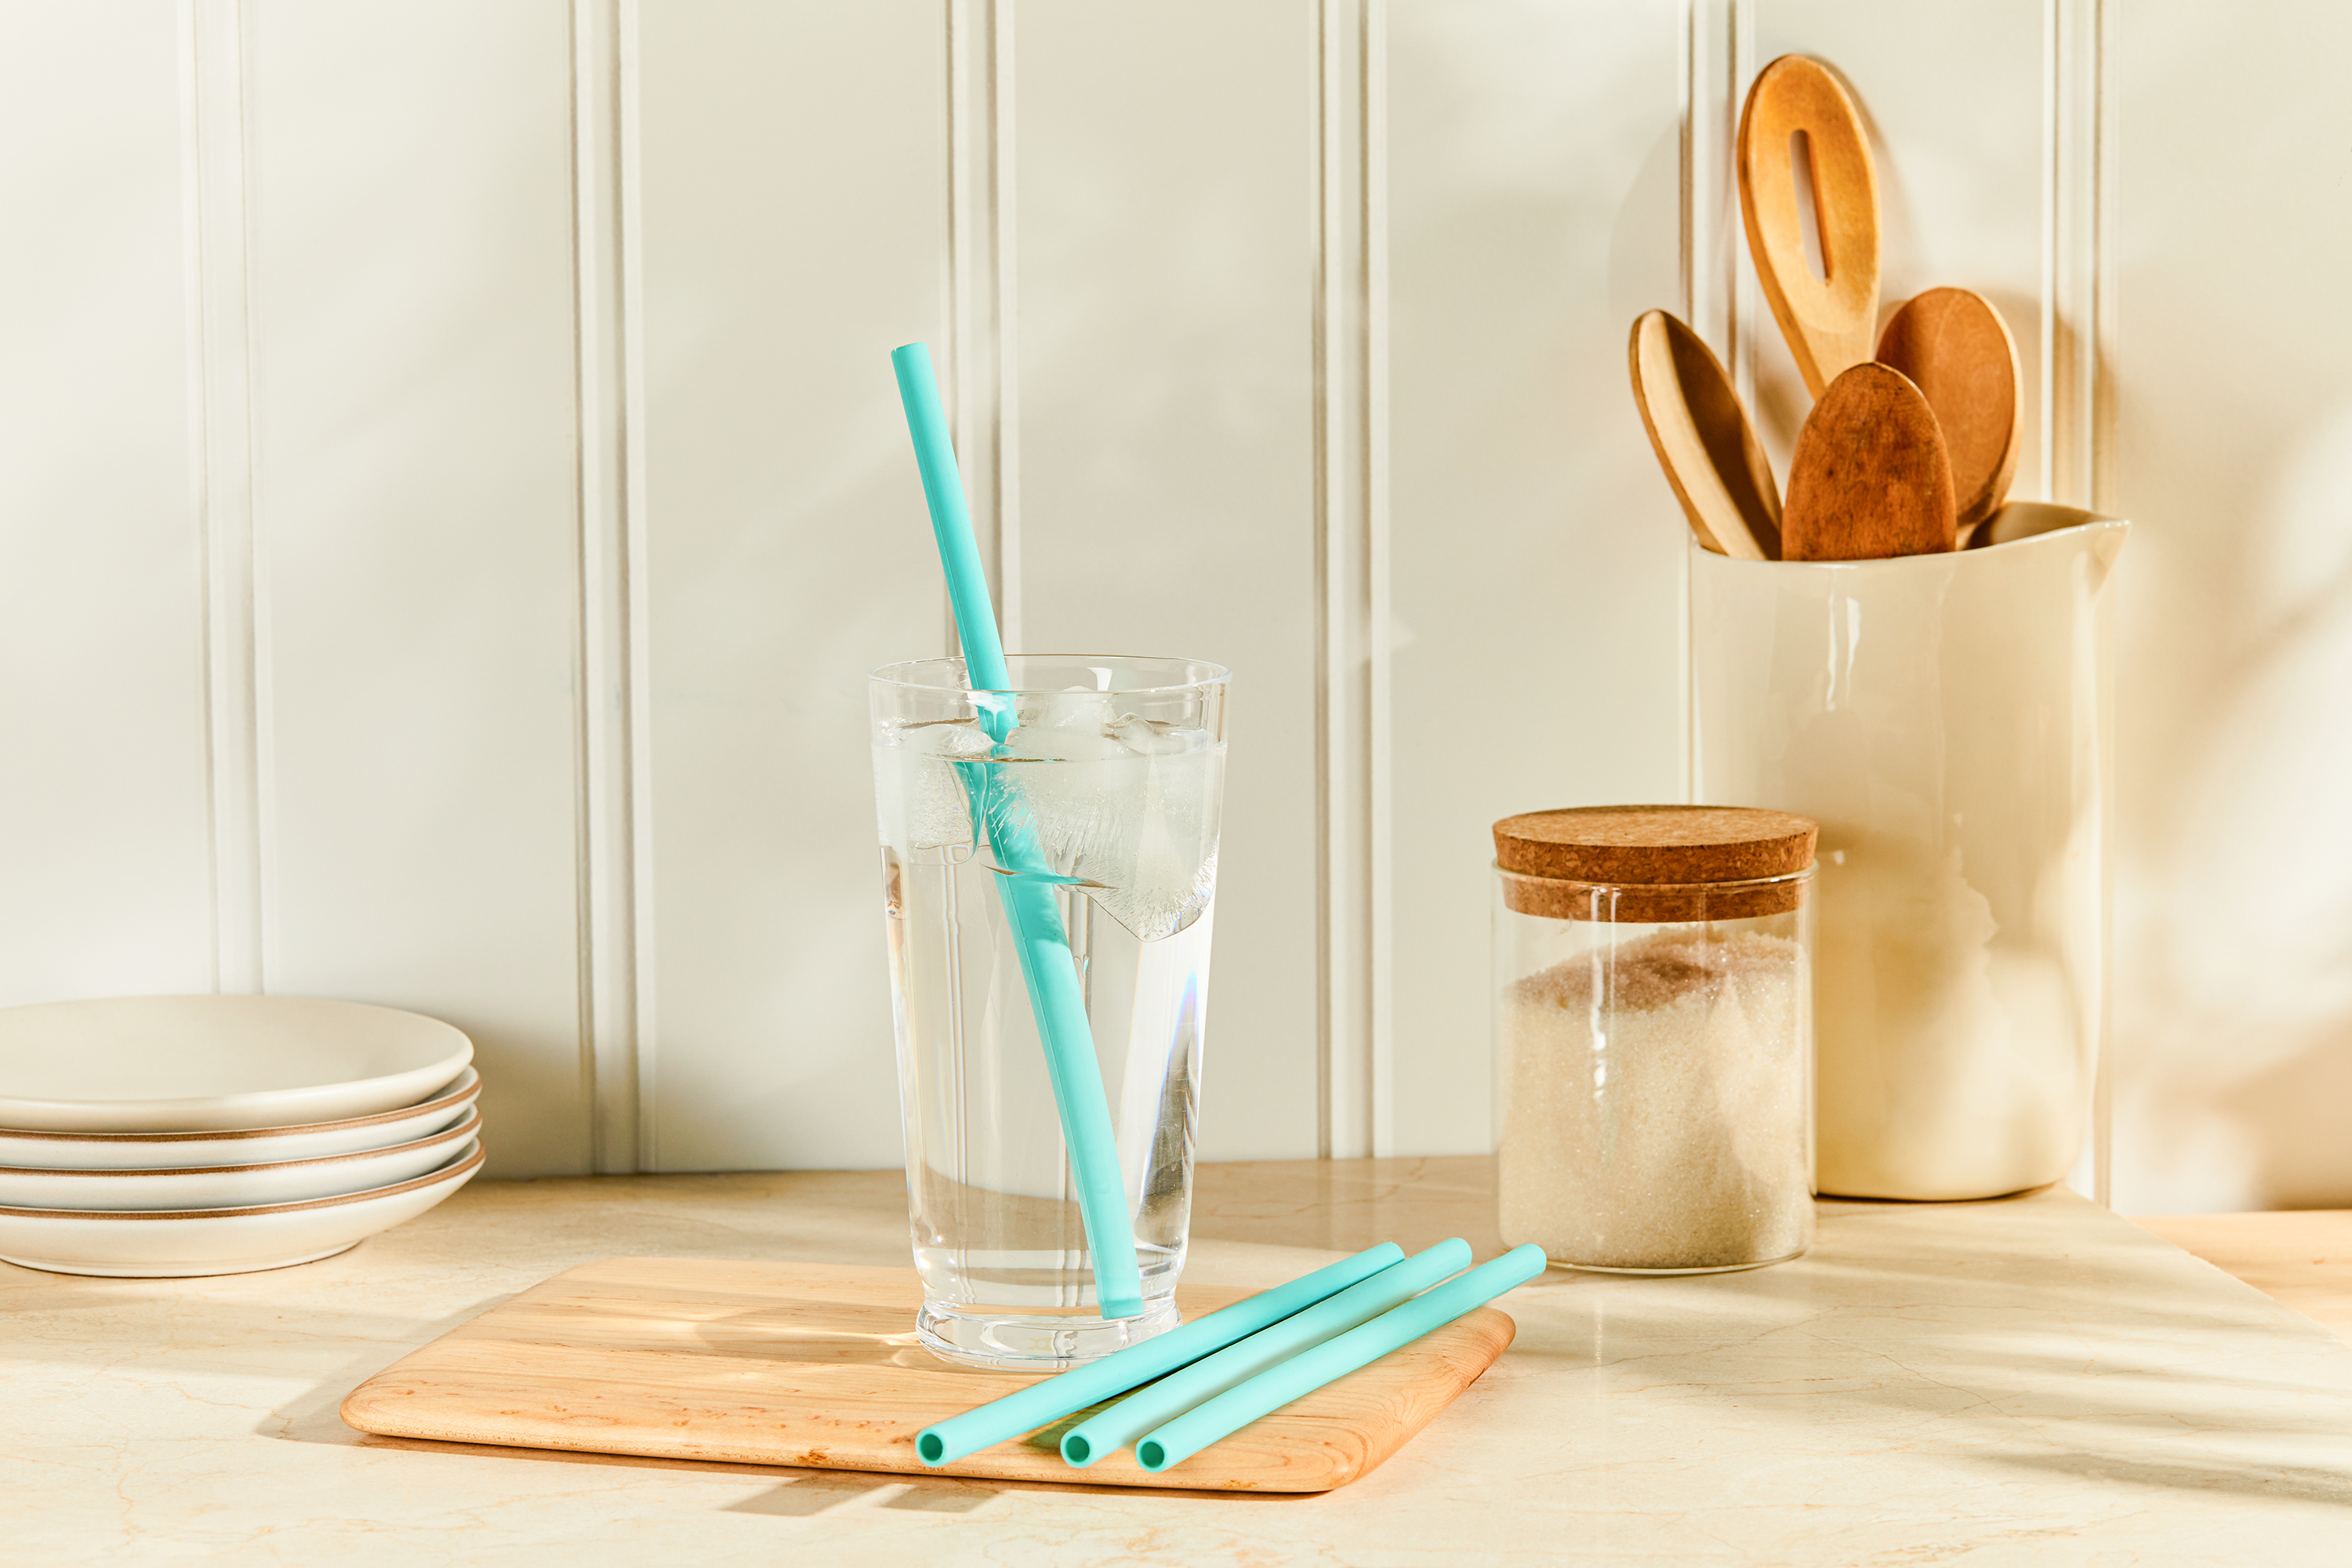 Image of 4 aqua silicone straws. 3 on the counter and one in a glass of ice water. 